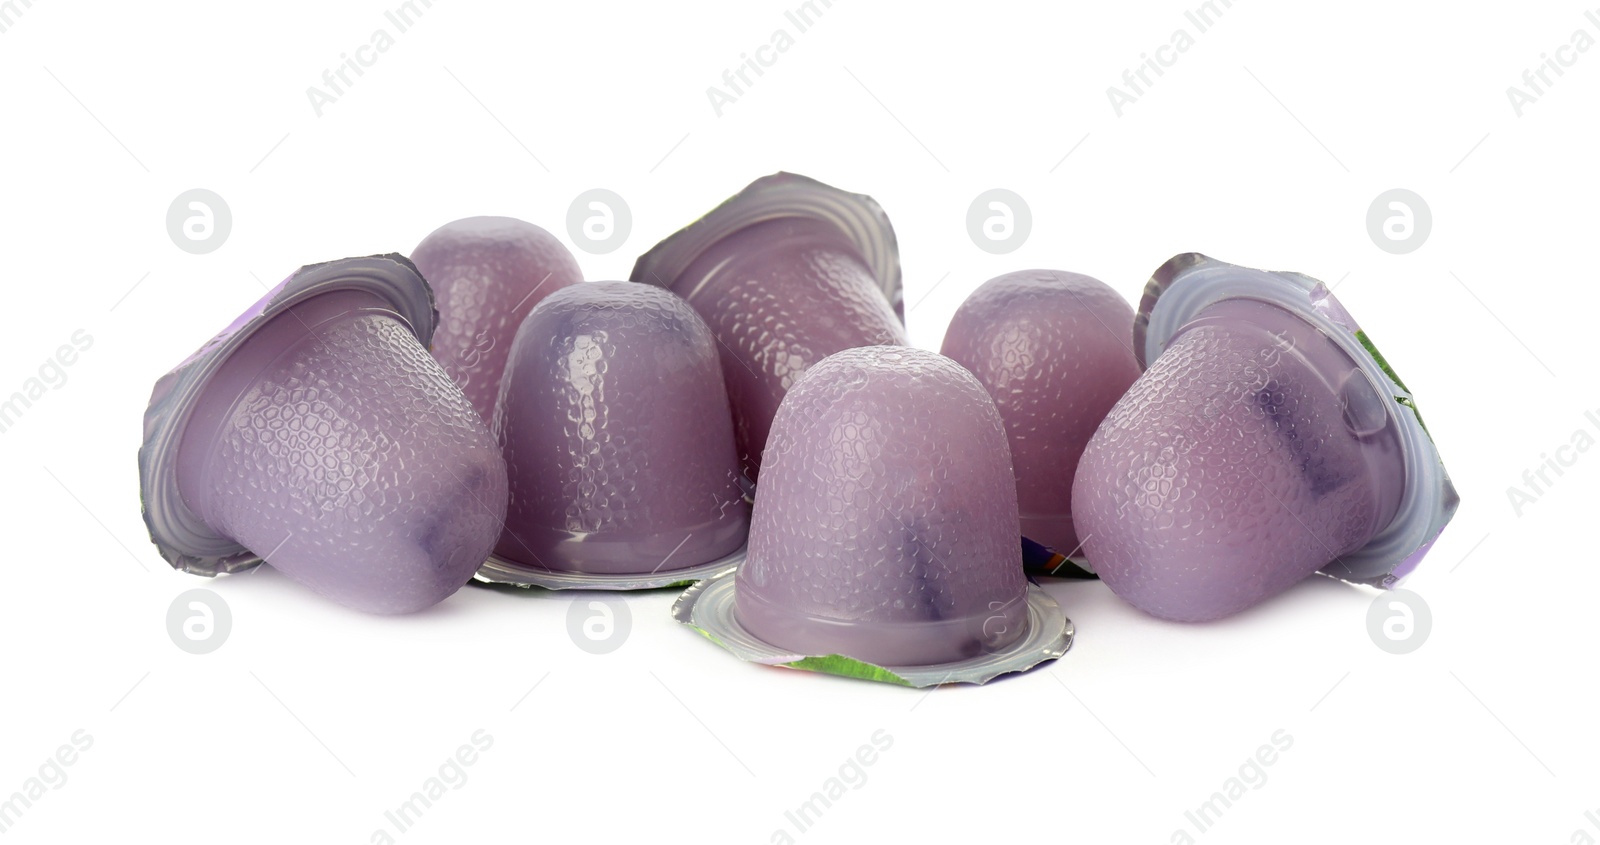 Photo of Tasty bright jelly cups on white background